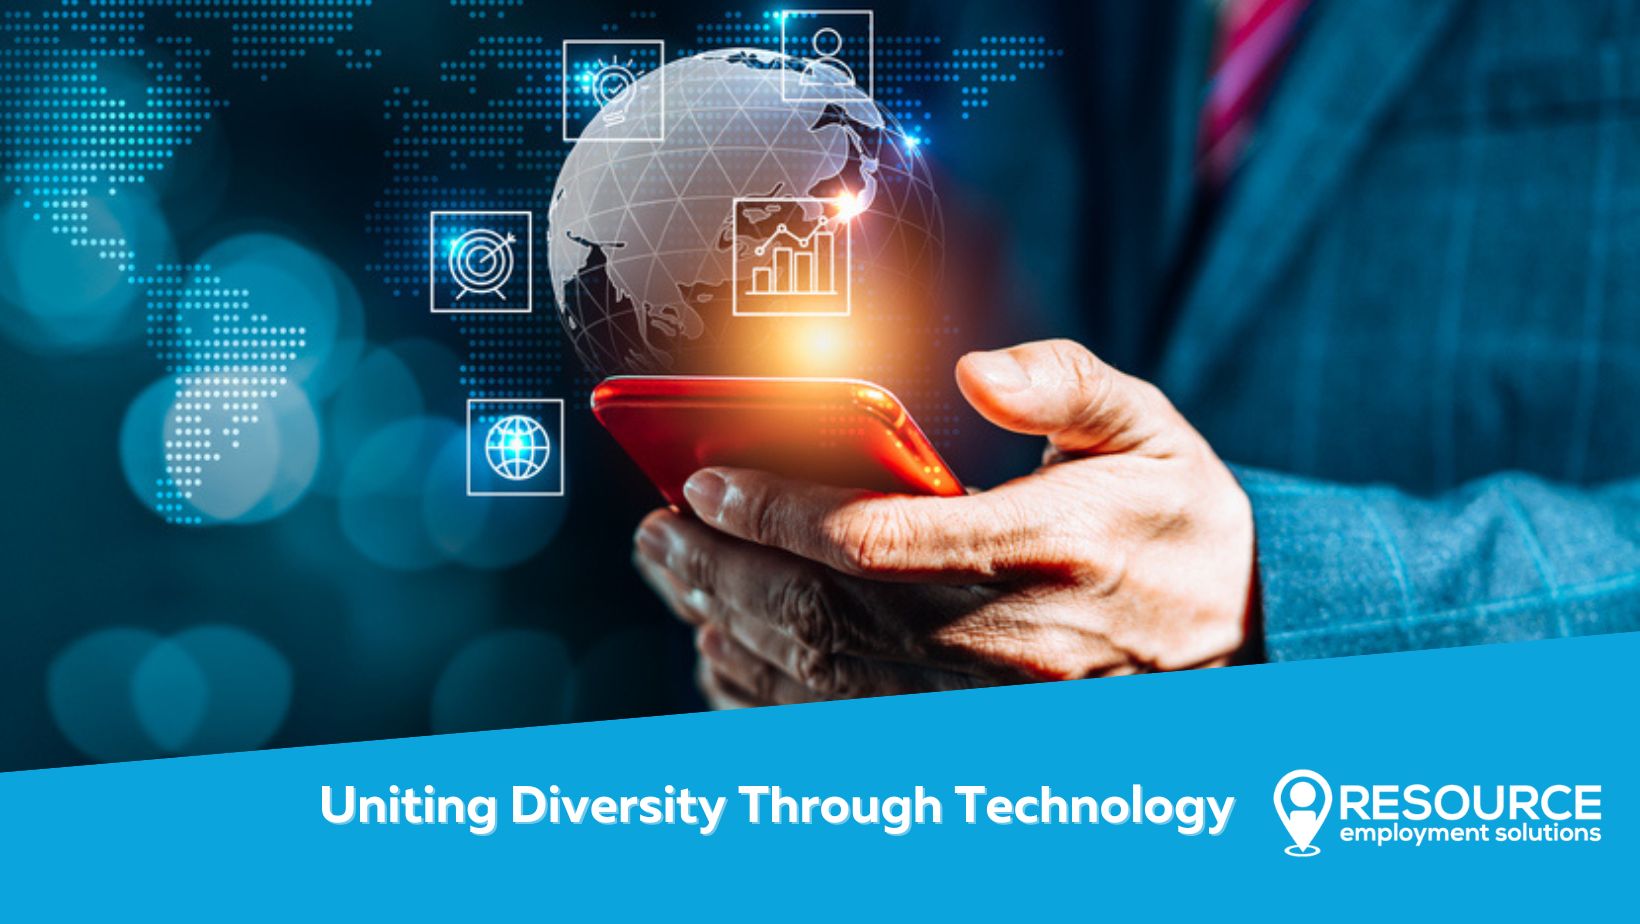 Uniting Diversity Through Technology: Building Inclusive Global Collaboration